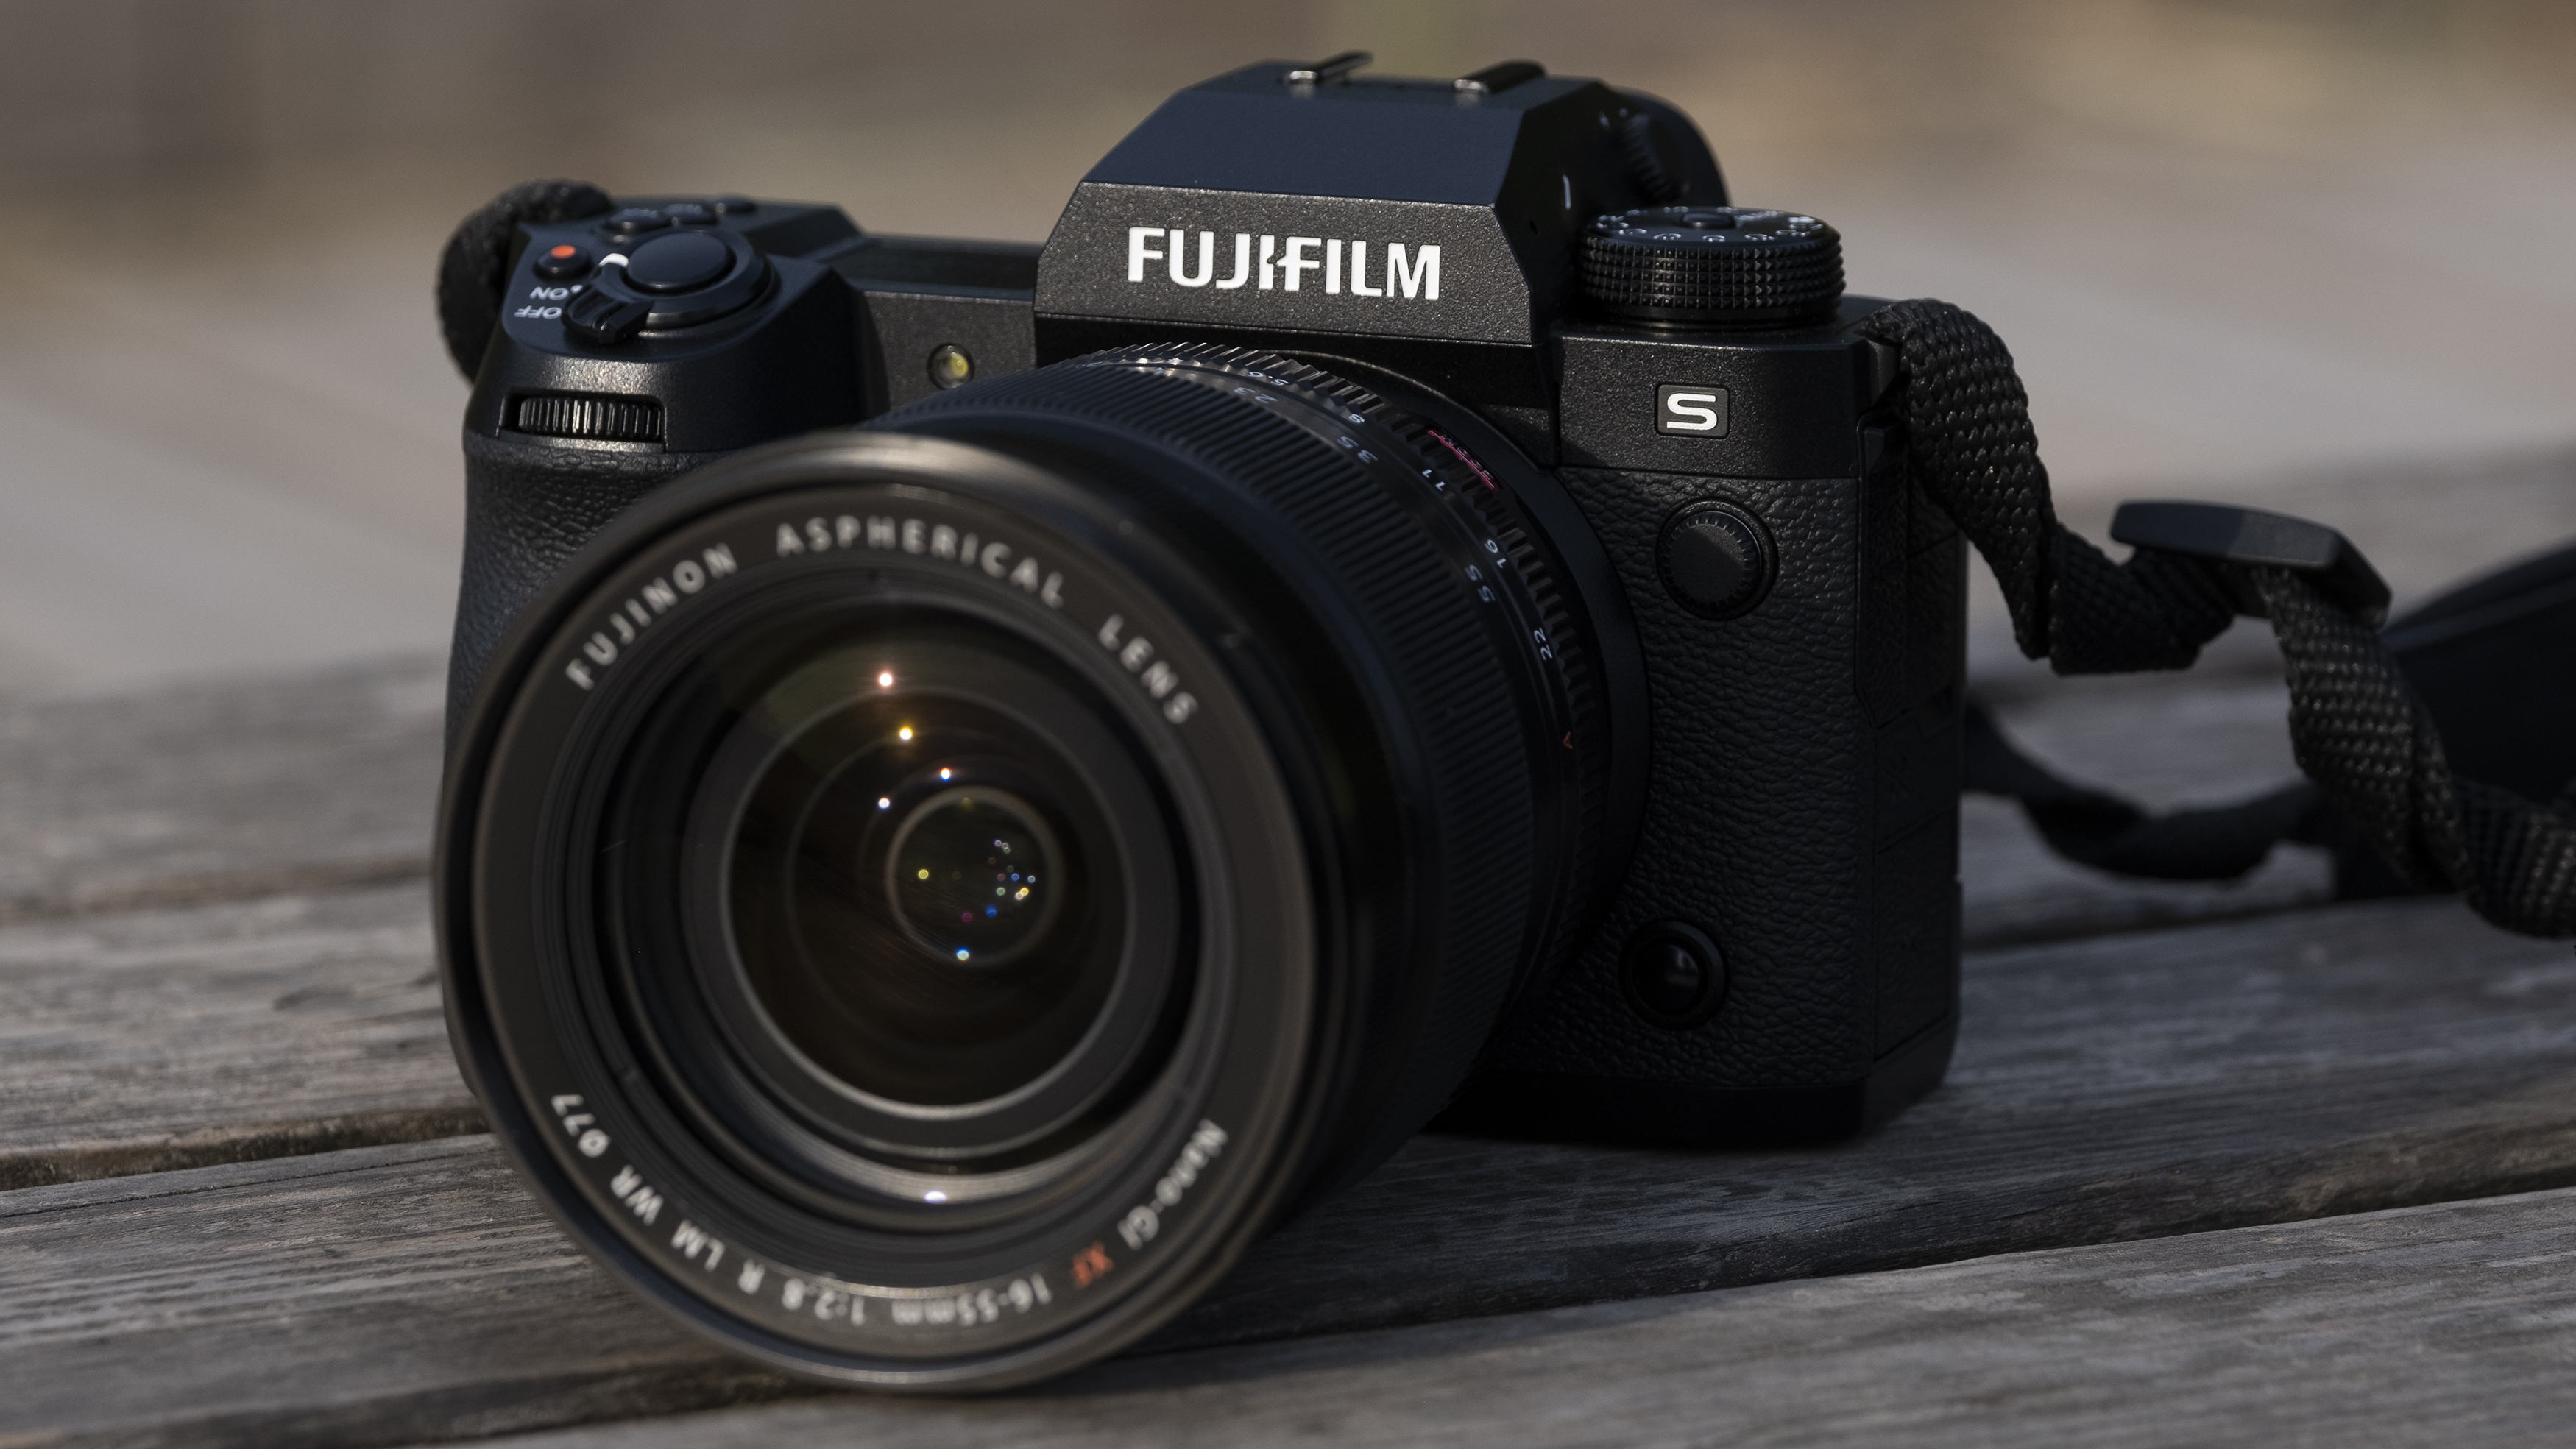 The Fujifilm X-H2S camera sitting on a wooden bench